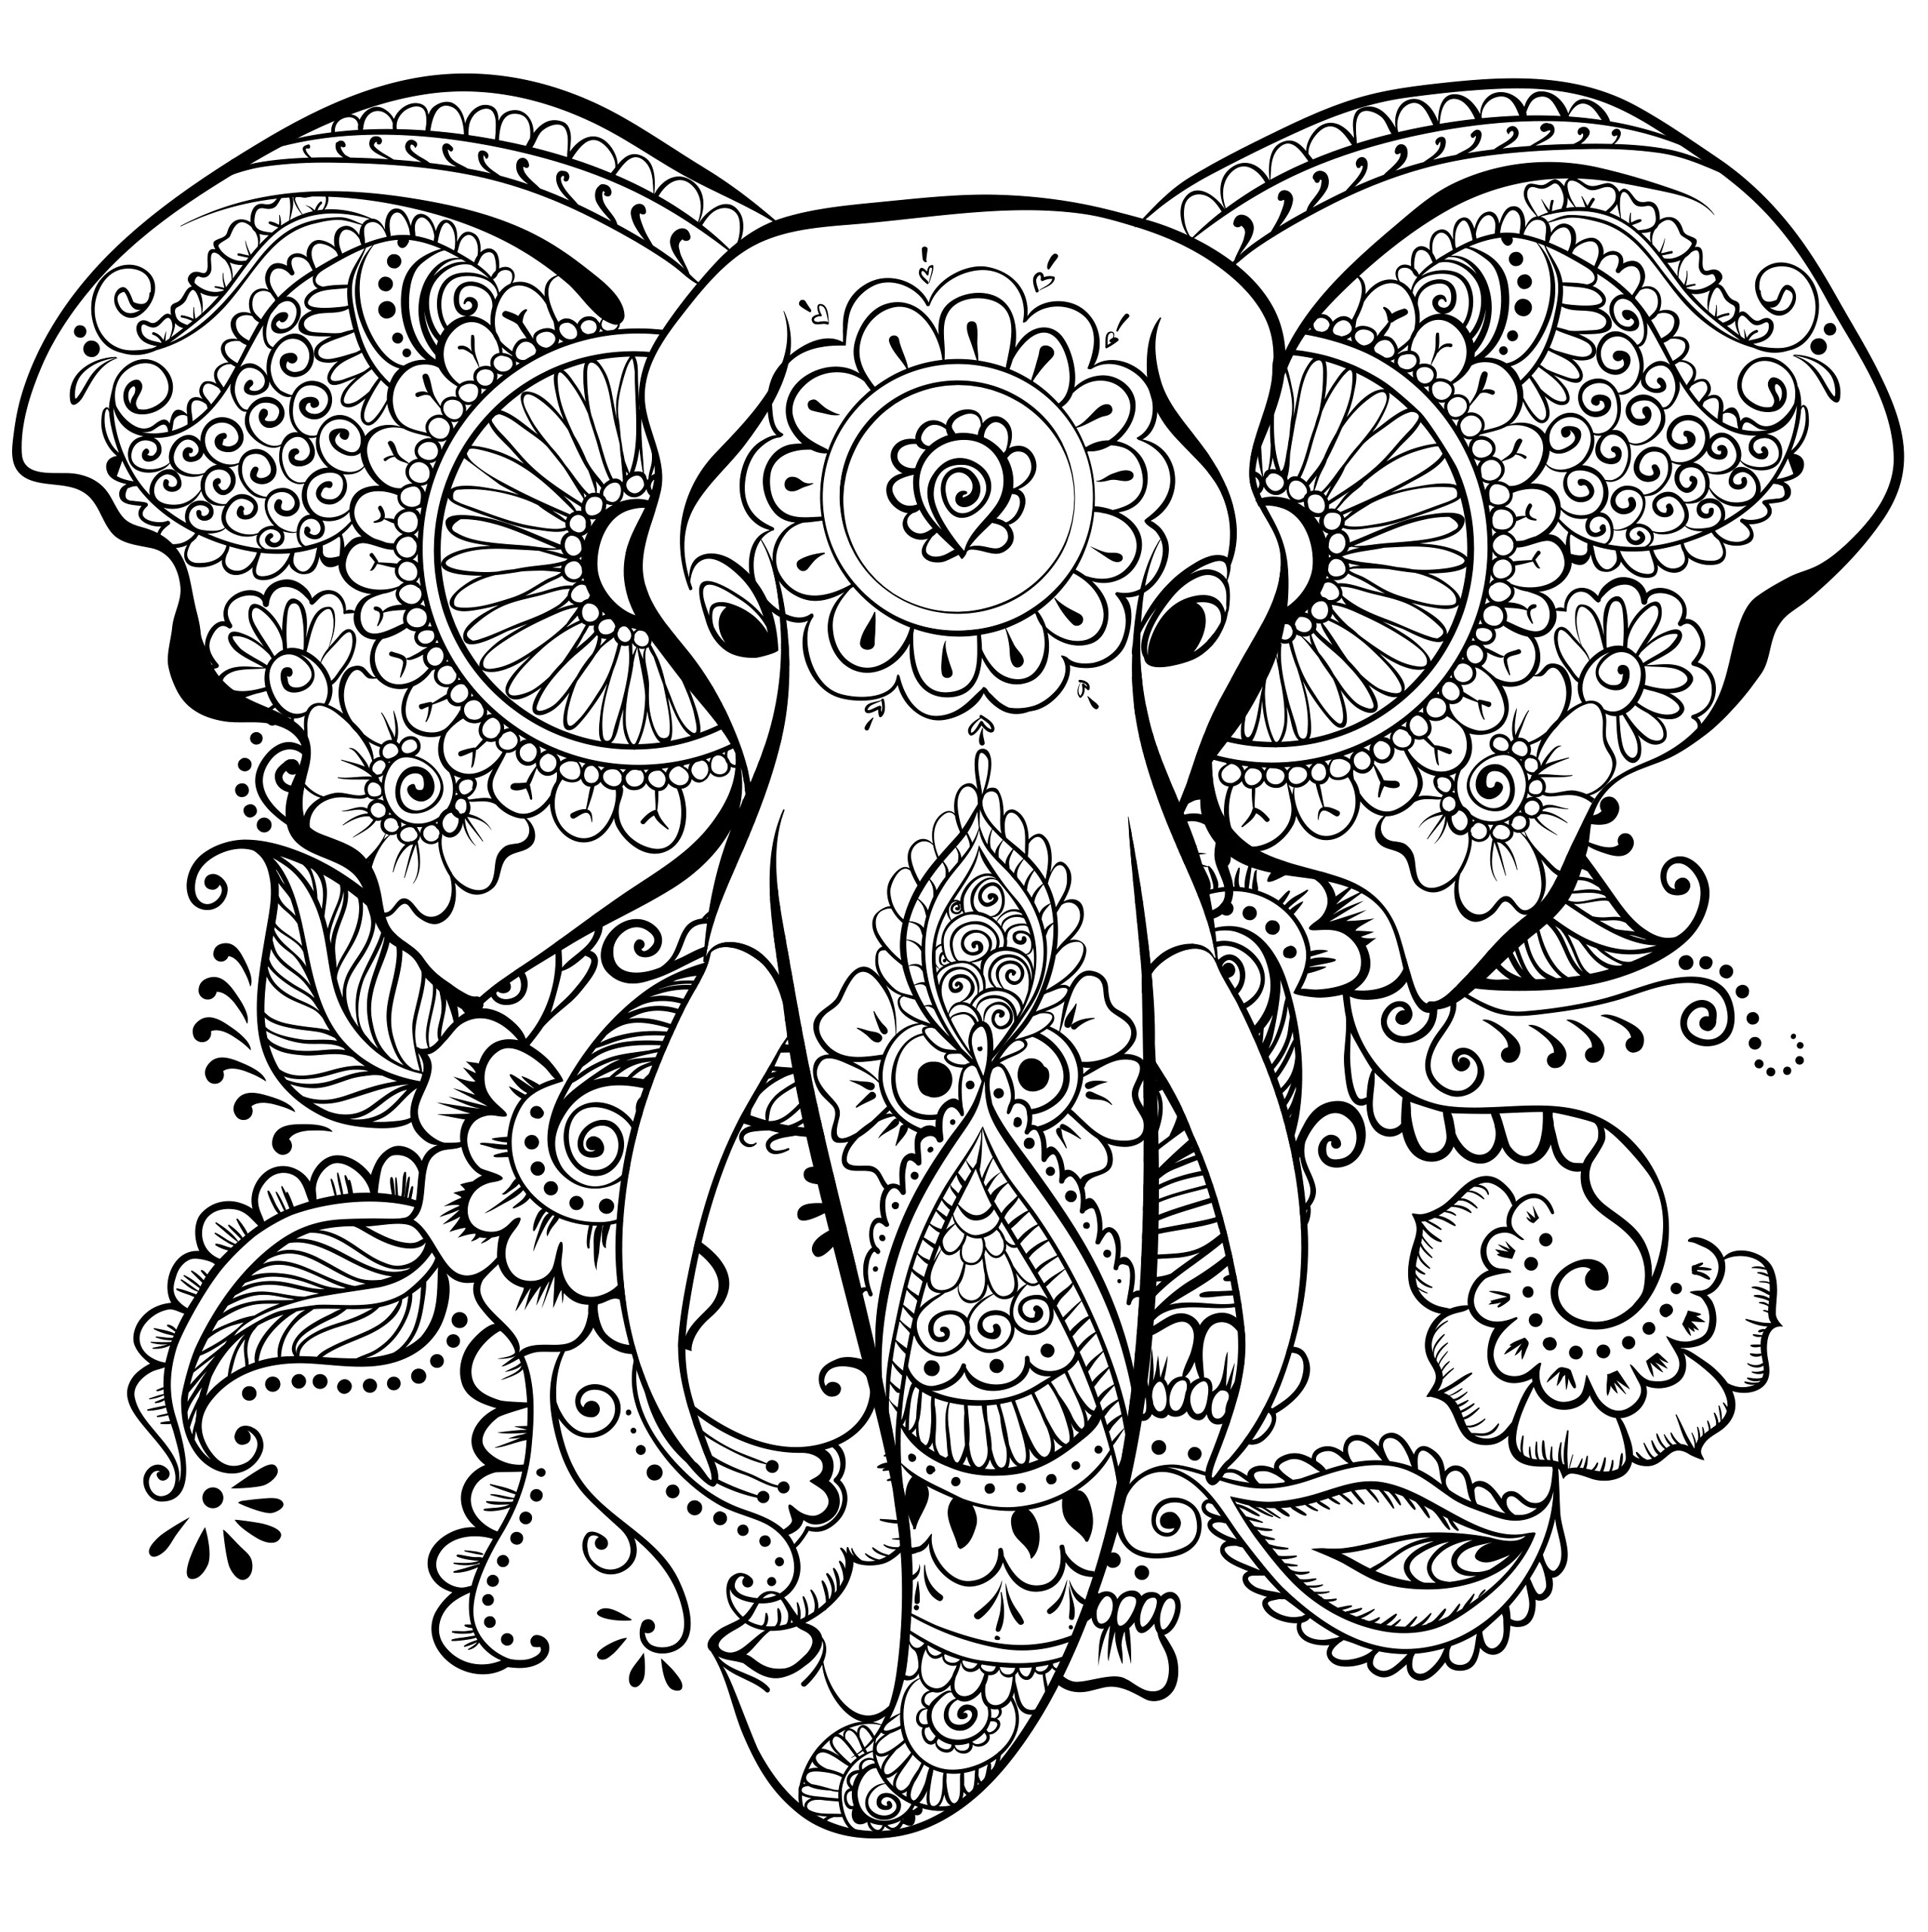 Adult Coloring Pages Elephant
 63 Adult Coloring Pages To Nourish Your Mental Visual